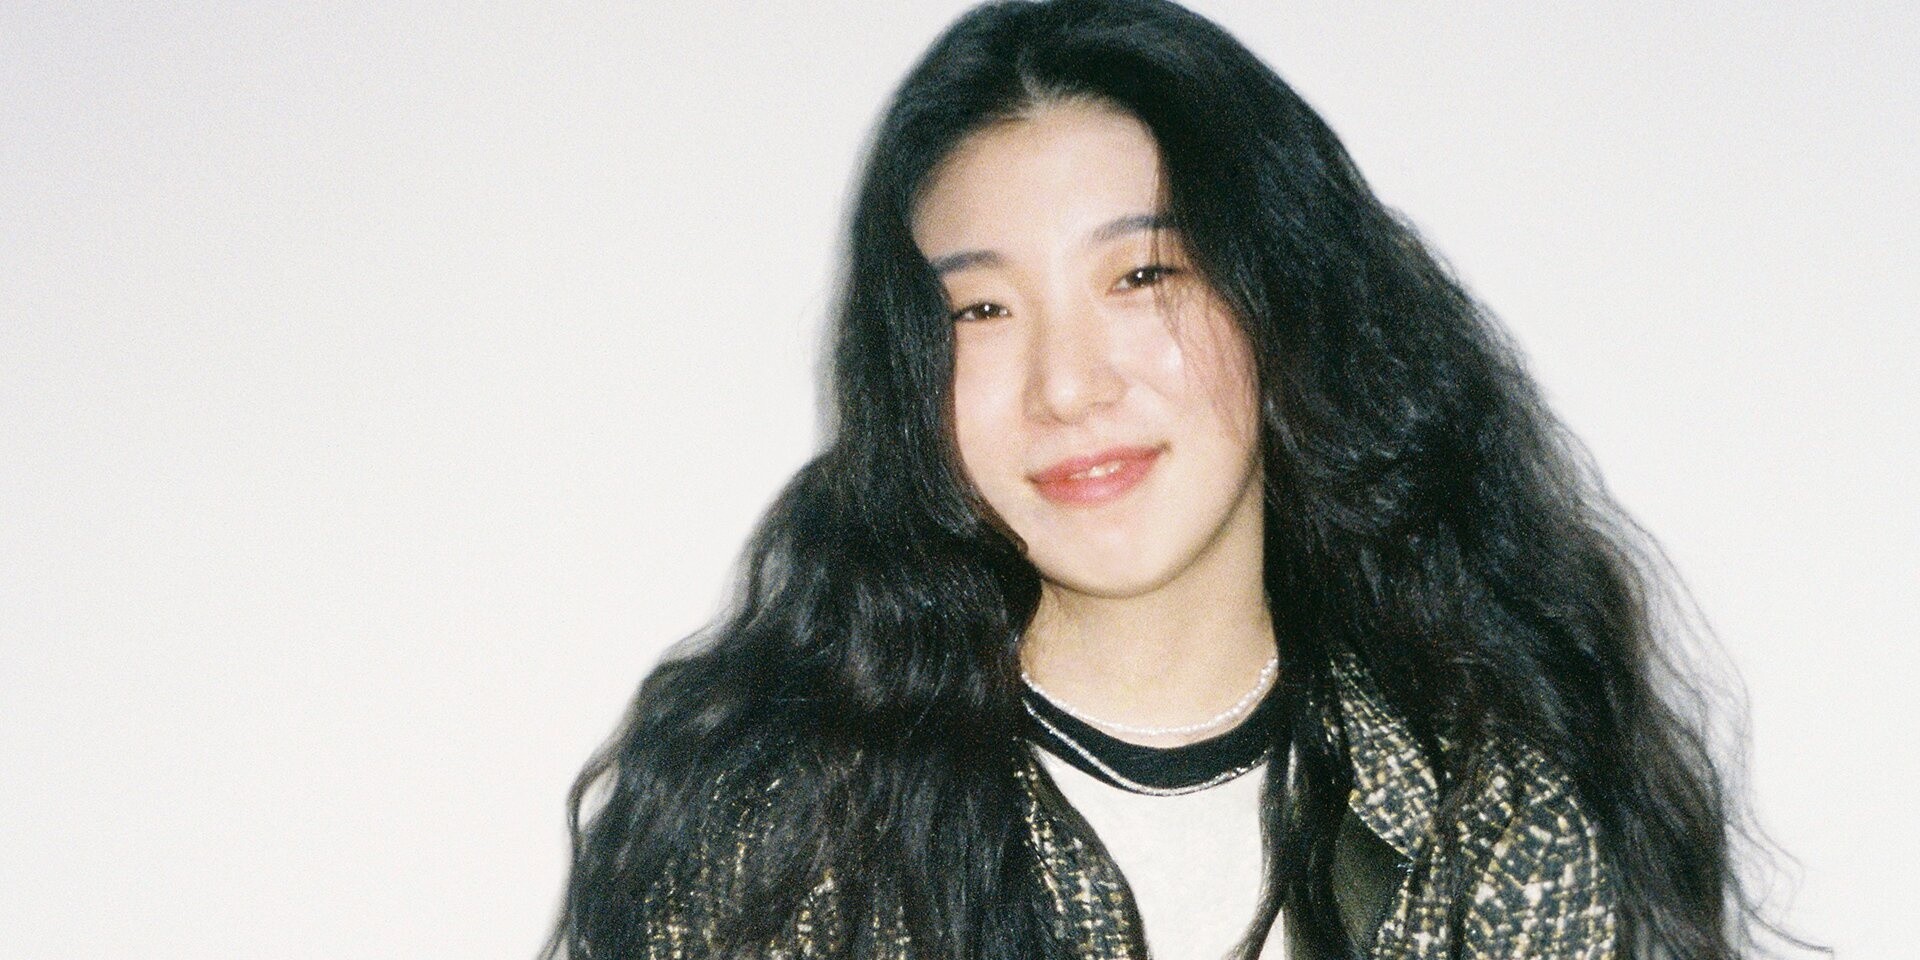 Asia Spotlight: Korean singer-songwriter sogumm on challenging herself, finding her dream, and working on her "mysterious" album 'Precious'